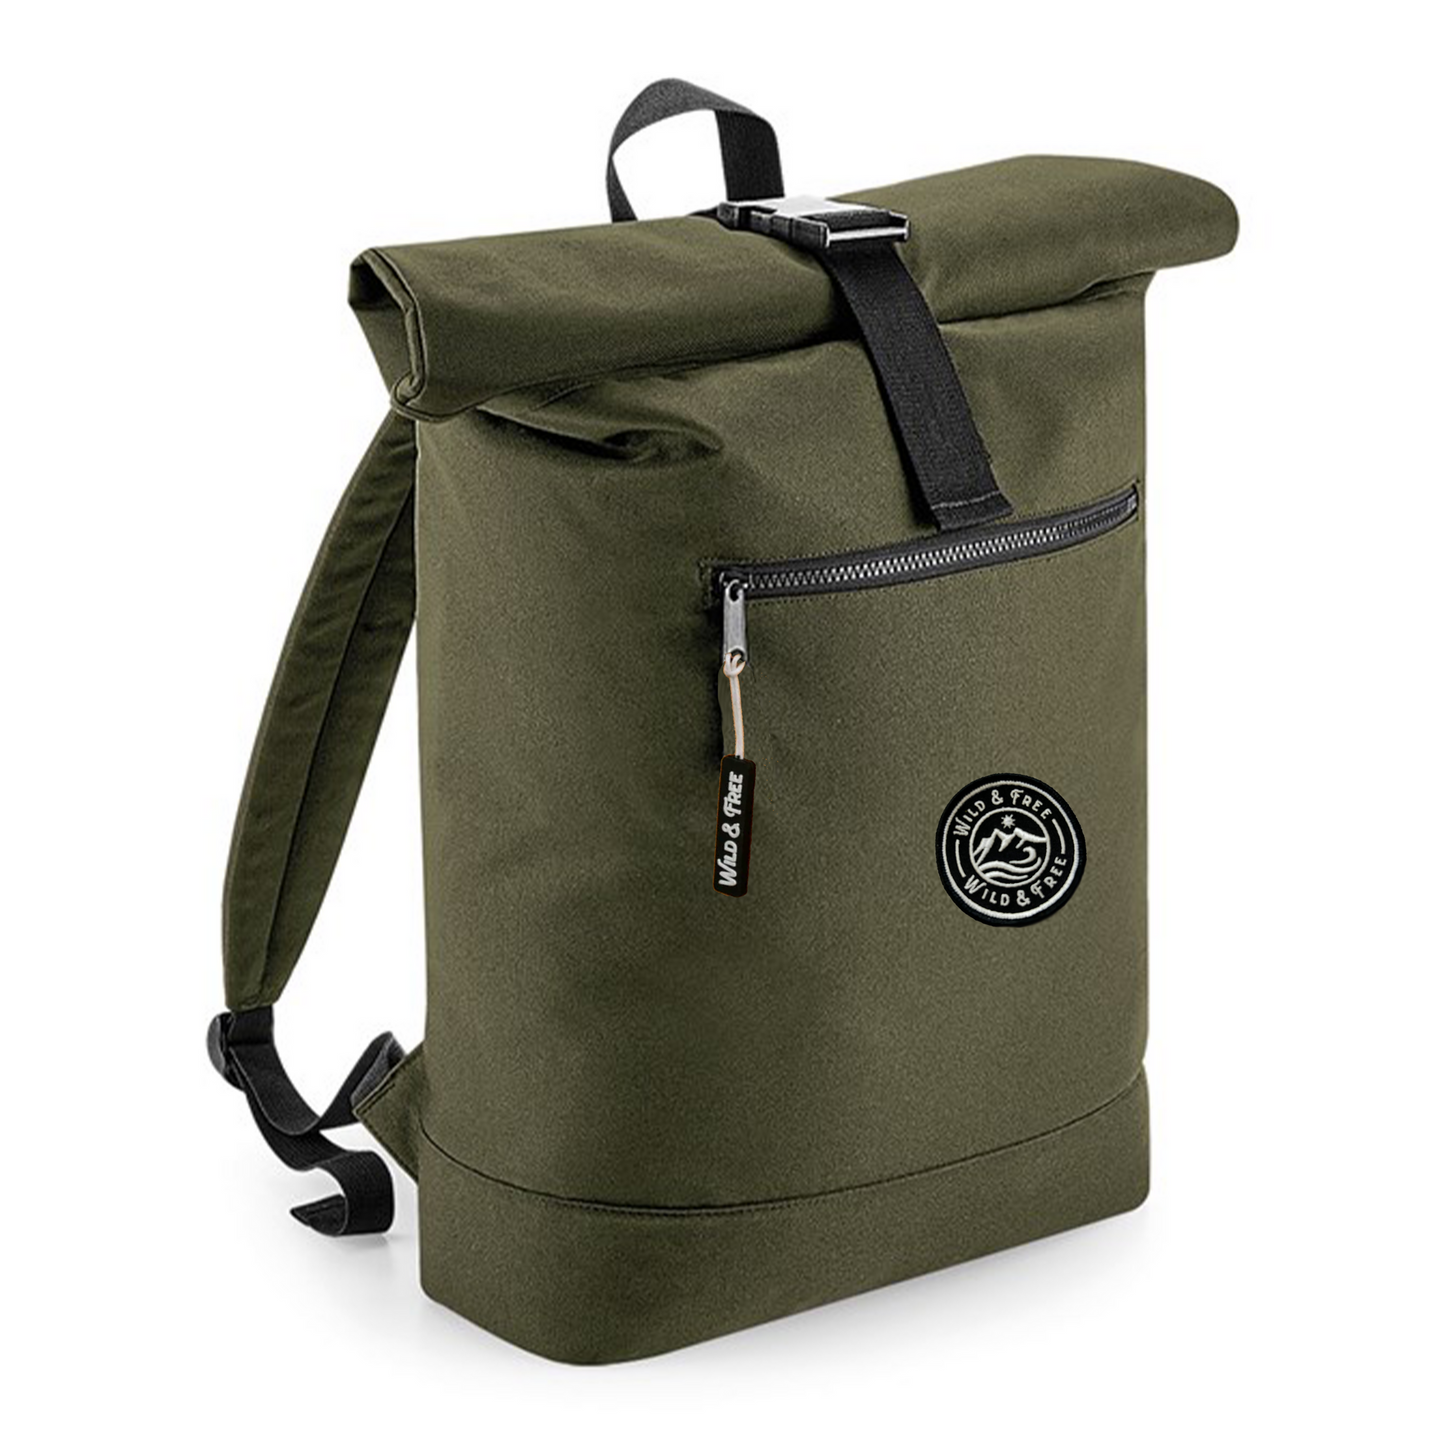 The Wild & Free Backpack